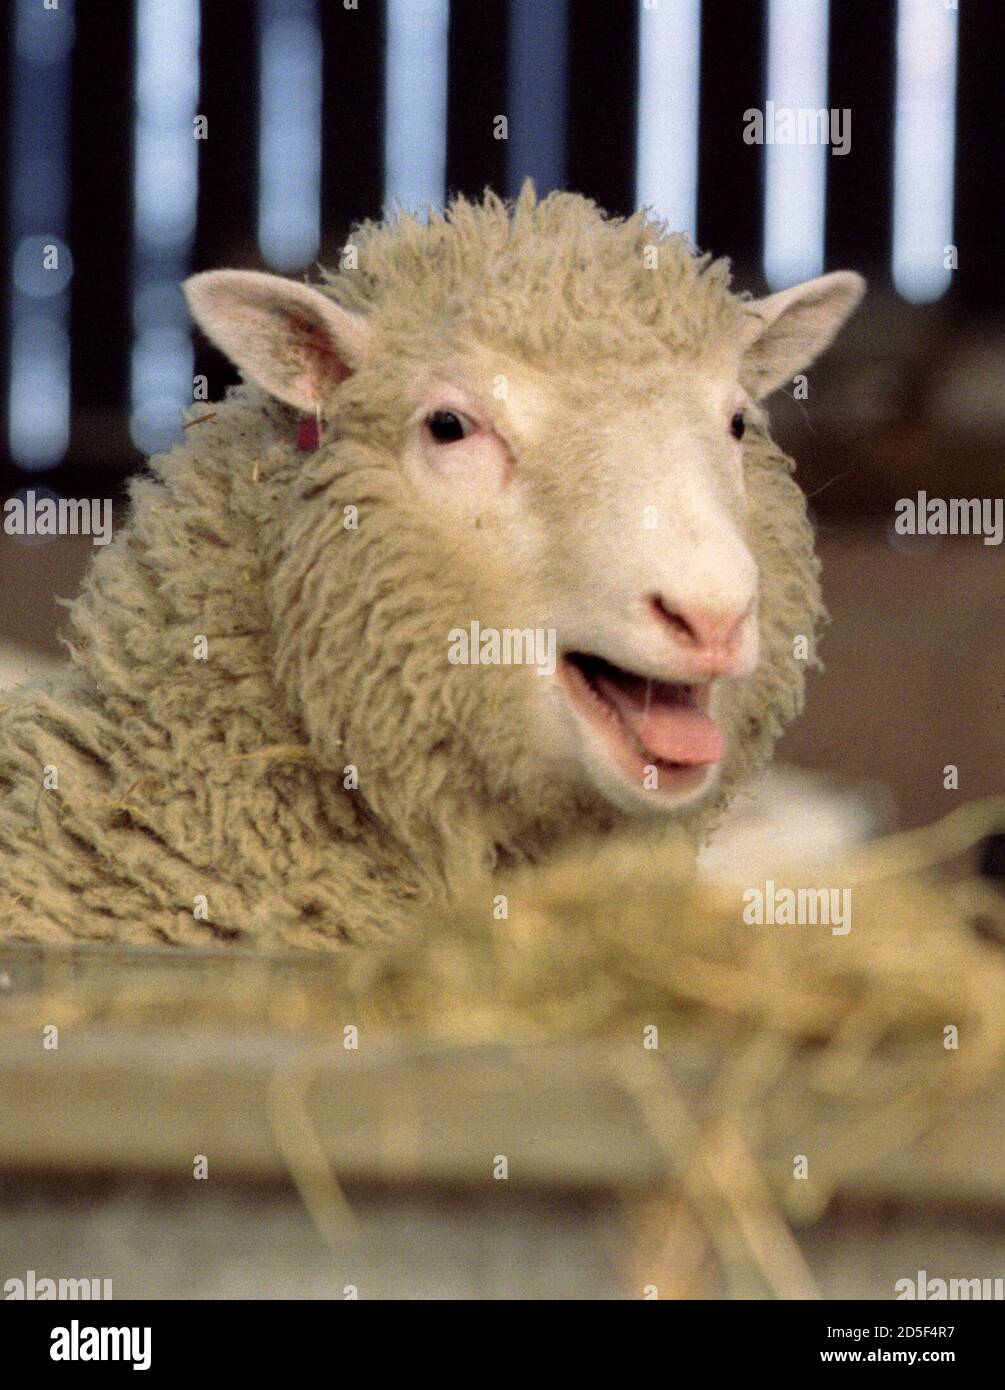 The world's first clone of an adult animal, Dolly the sheep, stands in her  pen at the Roslin Institute in Edinburgh, February 23. Dr Ian Wilmut and  his team of genetic scientists